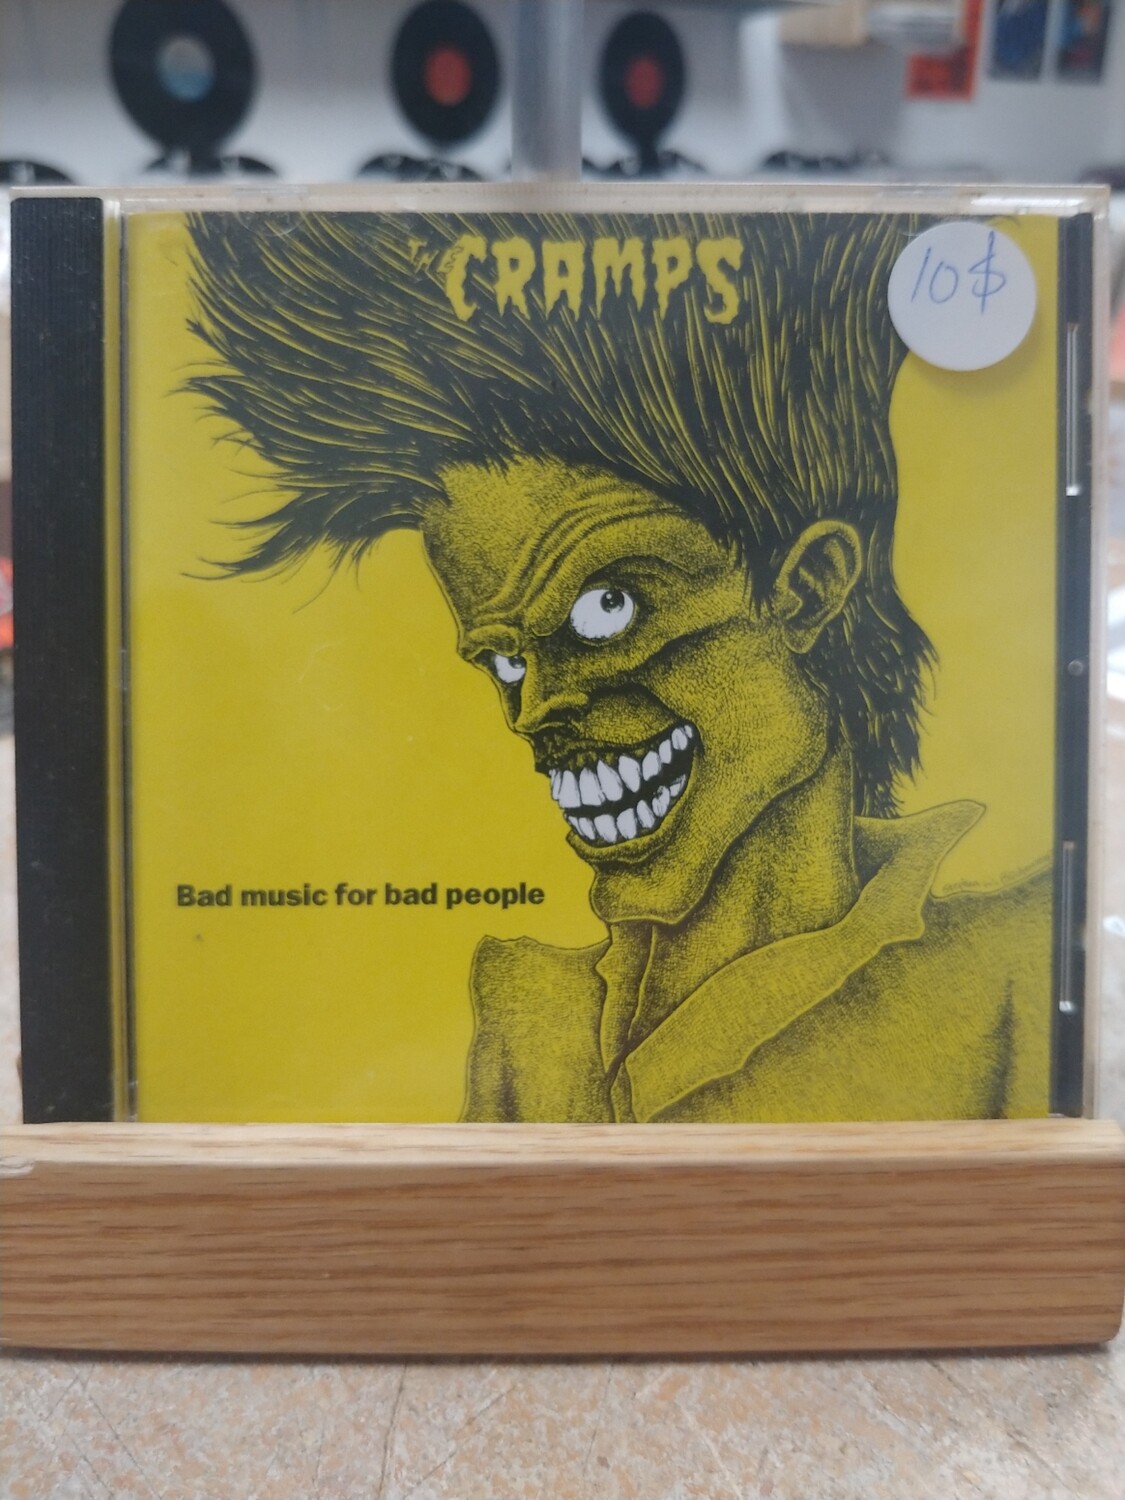 The Cramps - Bad music for bad people (CD)